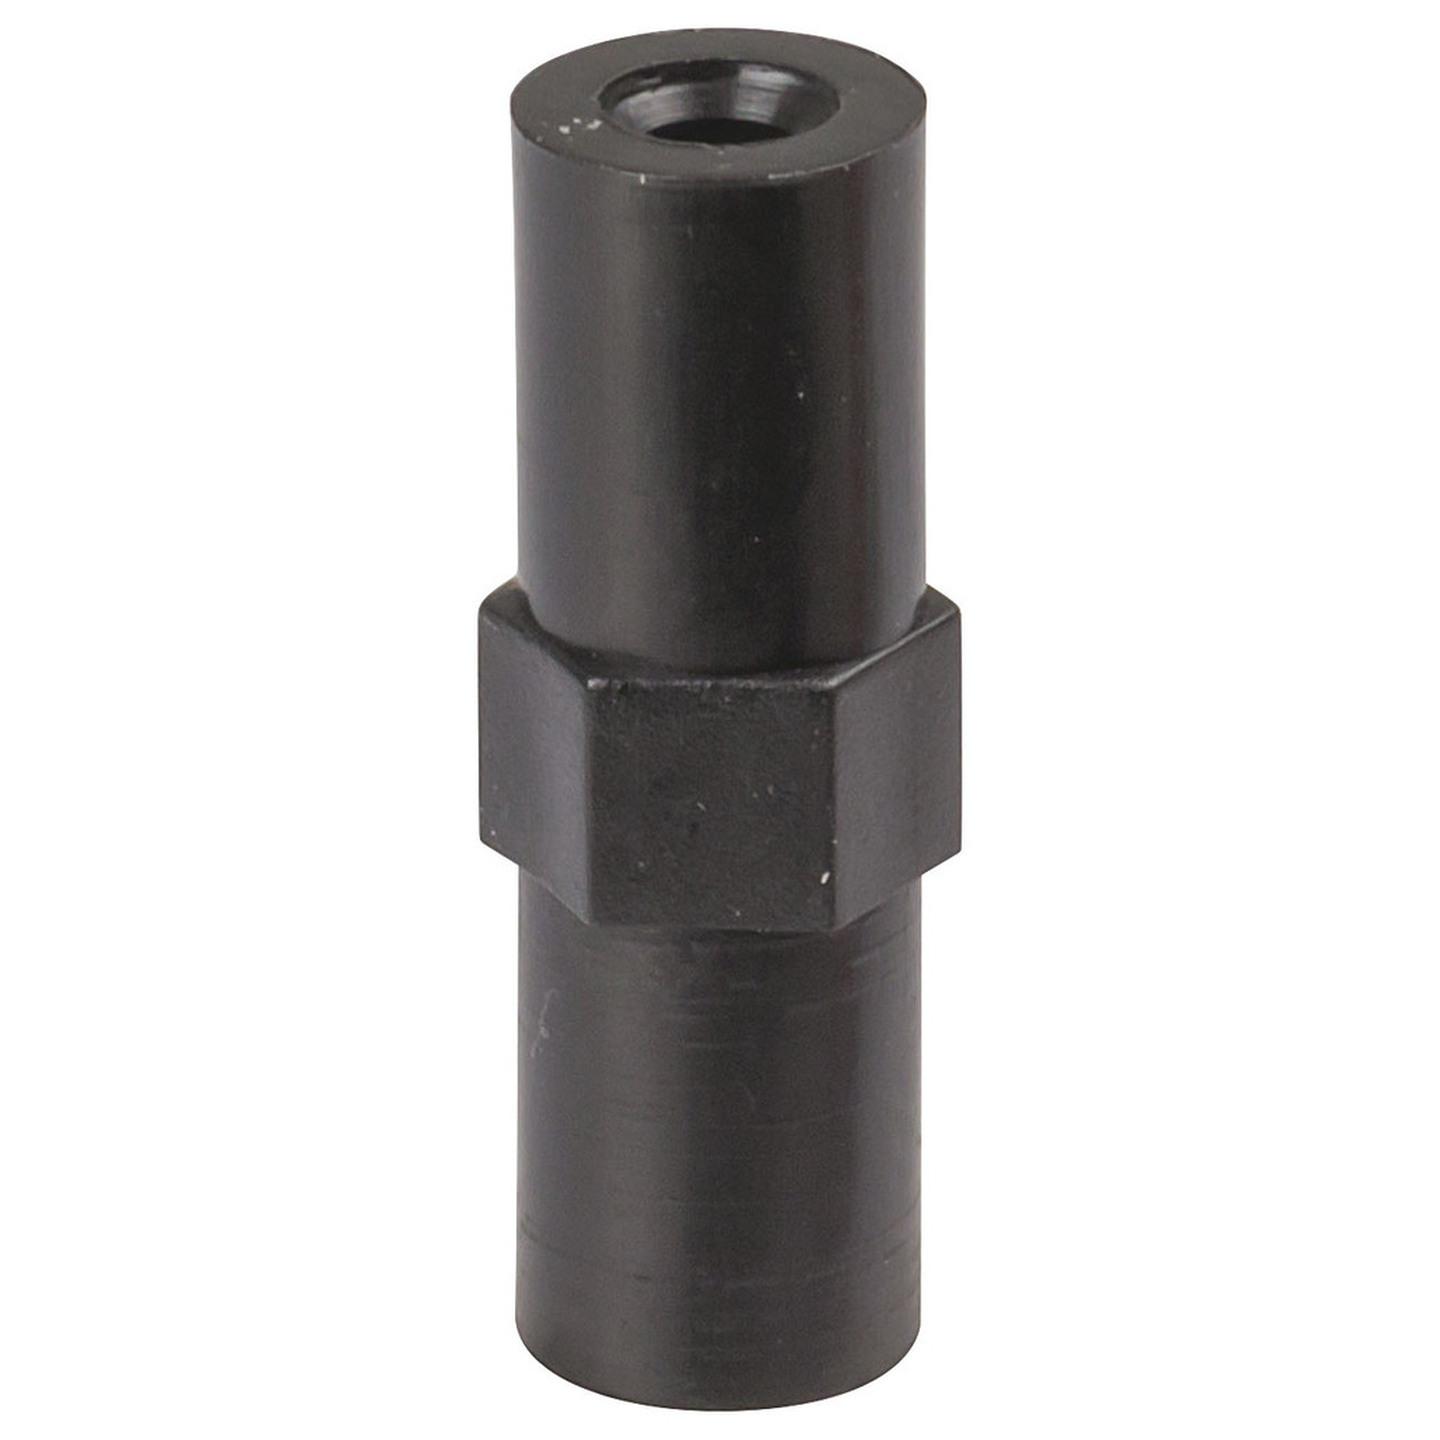 25mm Nylon PCB Spacers - Pack of 4